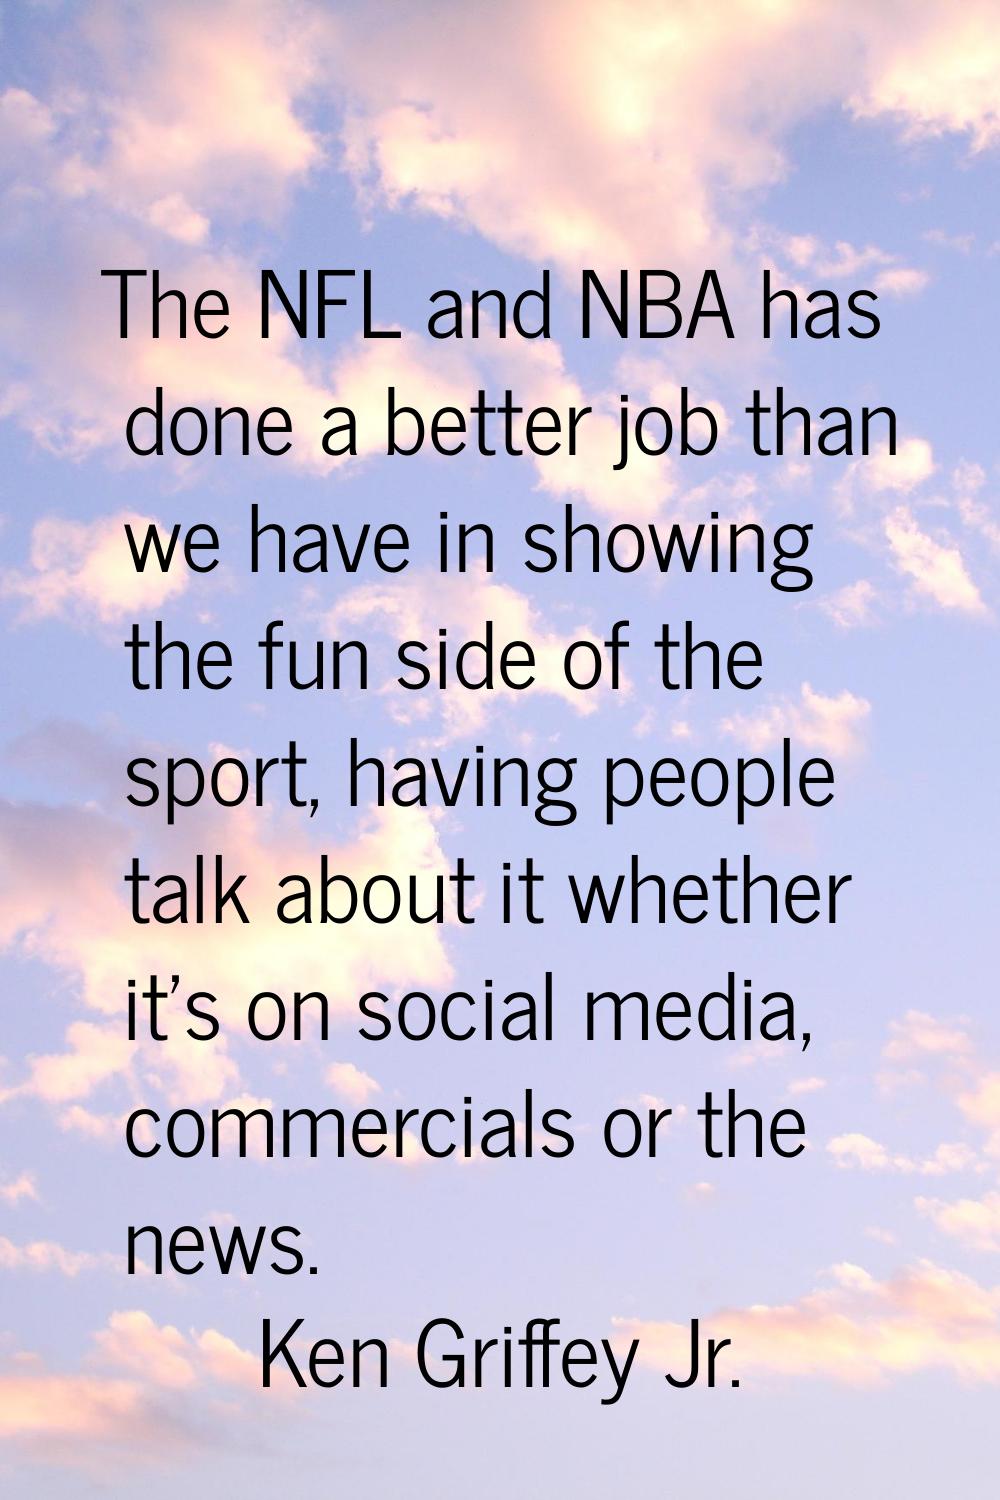 The NFL and NBA has done a better job than we have in showing the fun side of the sport, having peo